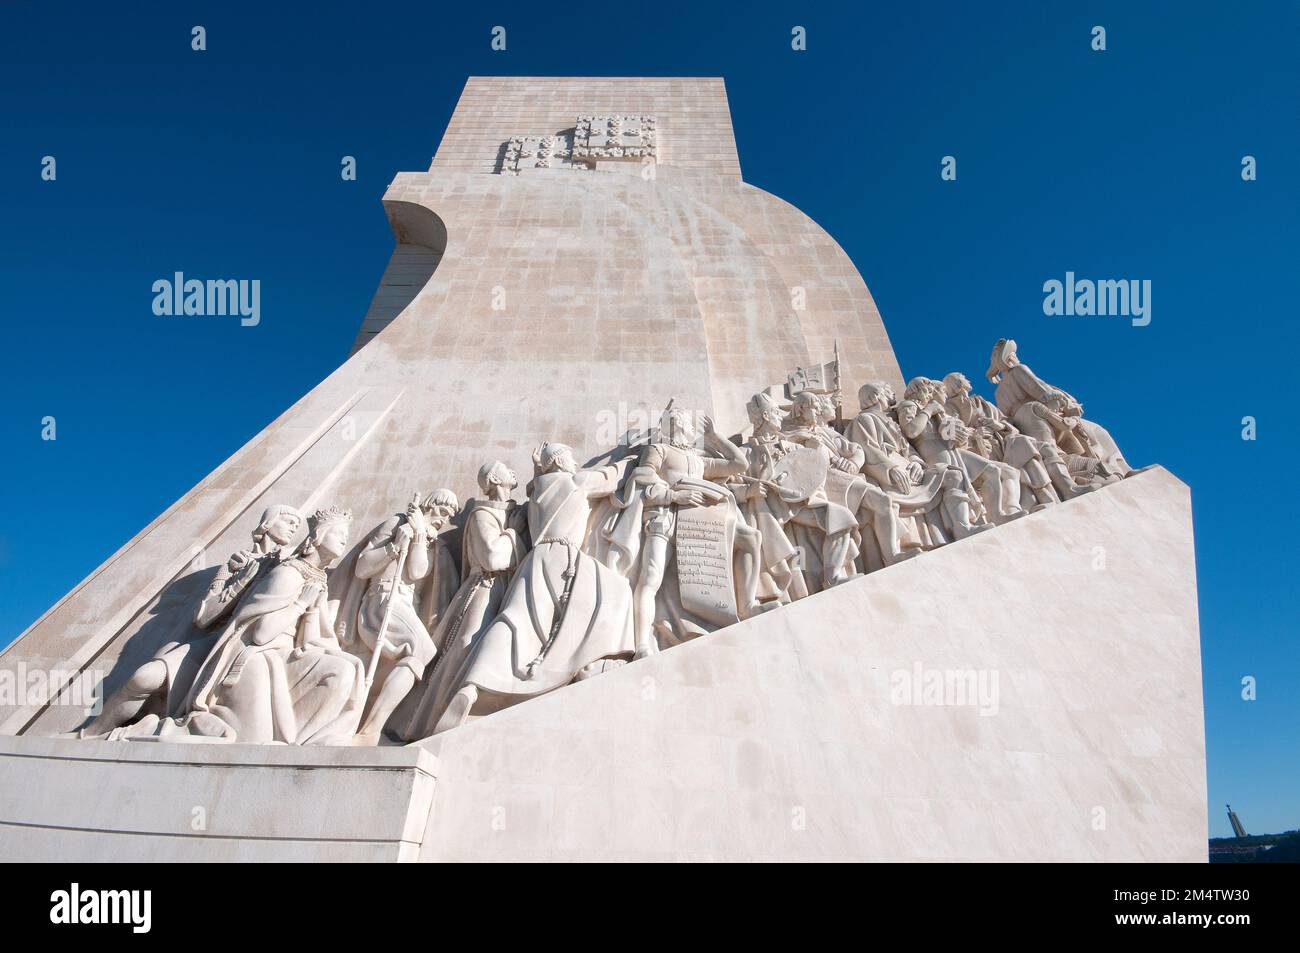 Padrao dos Descobrimentos (Monument to the Discoveries) in Belem district, Lisbon, Portugal Stock Photo